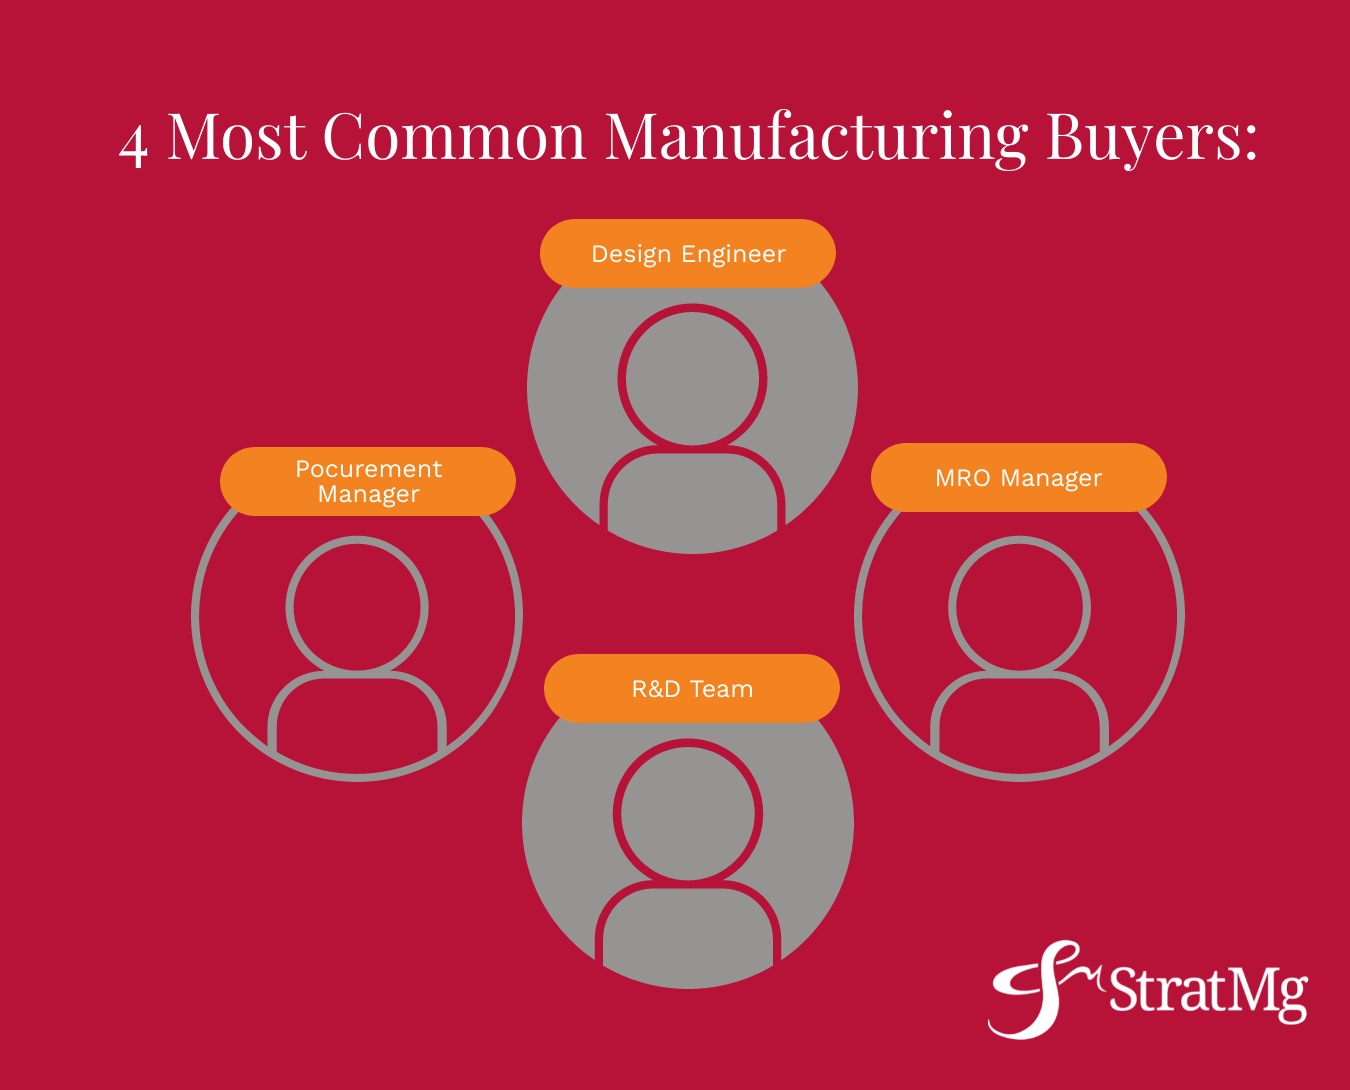 4 most common manufacturing buyers are procurement managers, design engineers, MRO manager, and the R&D team